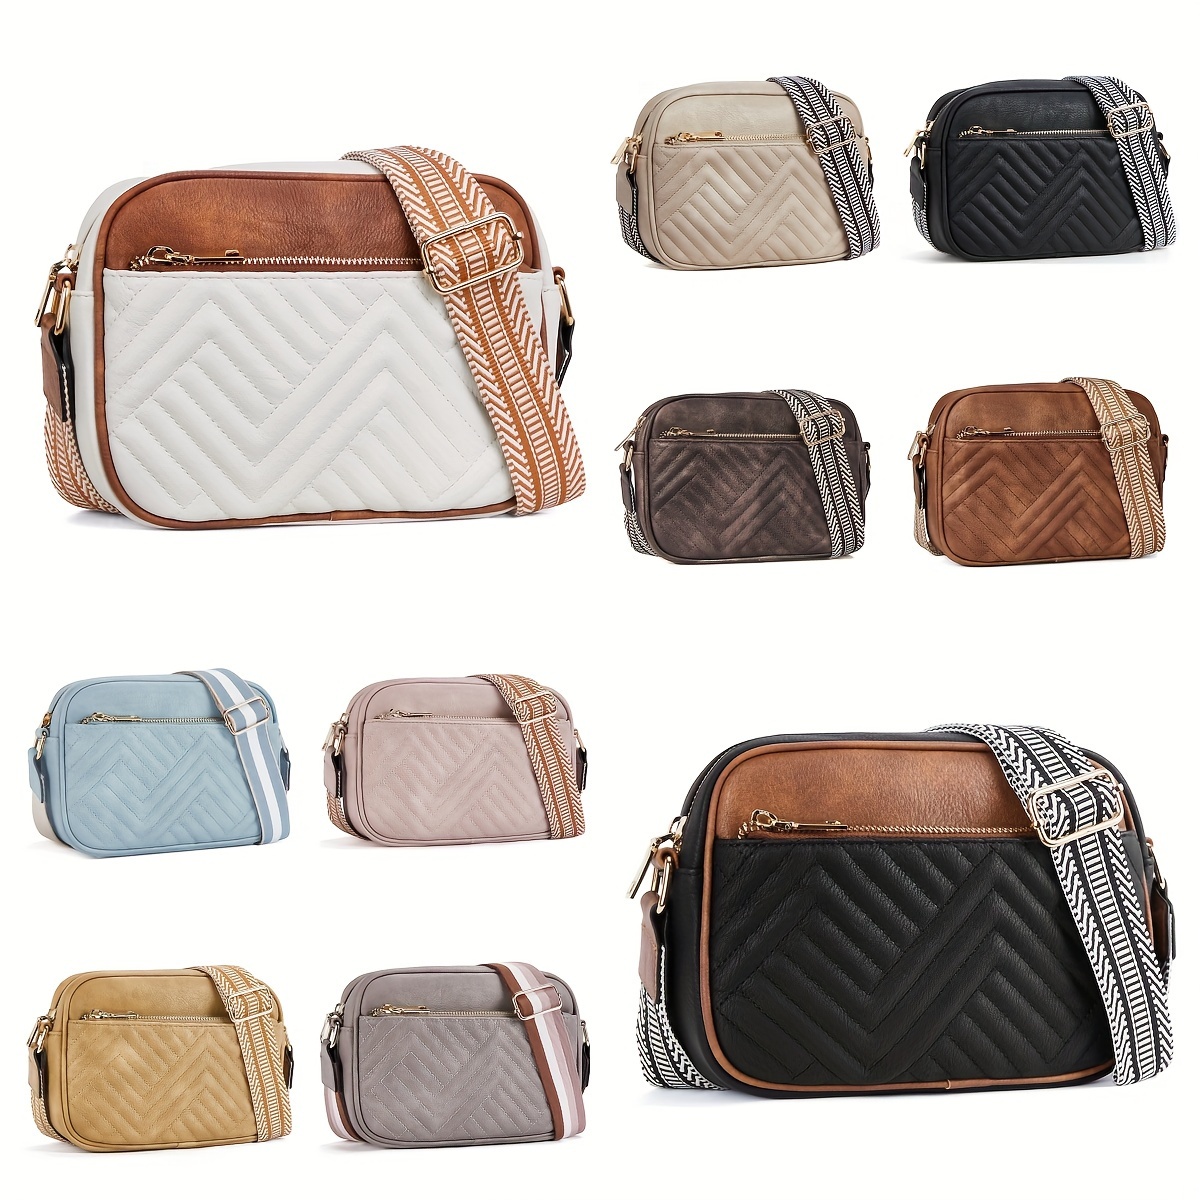 

Quilted Crossbody Bags For Women, Vegan Leather Square Purses, Small Shoulder Handbags With Wide Strap